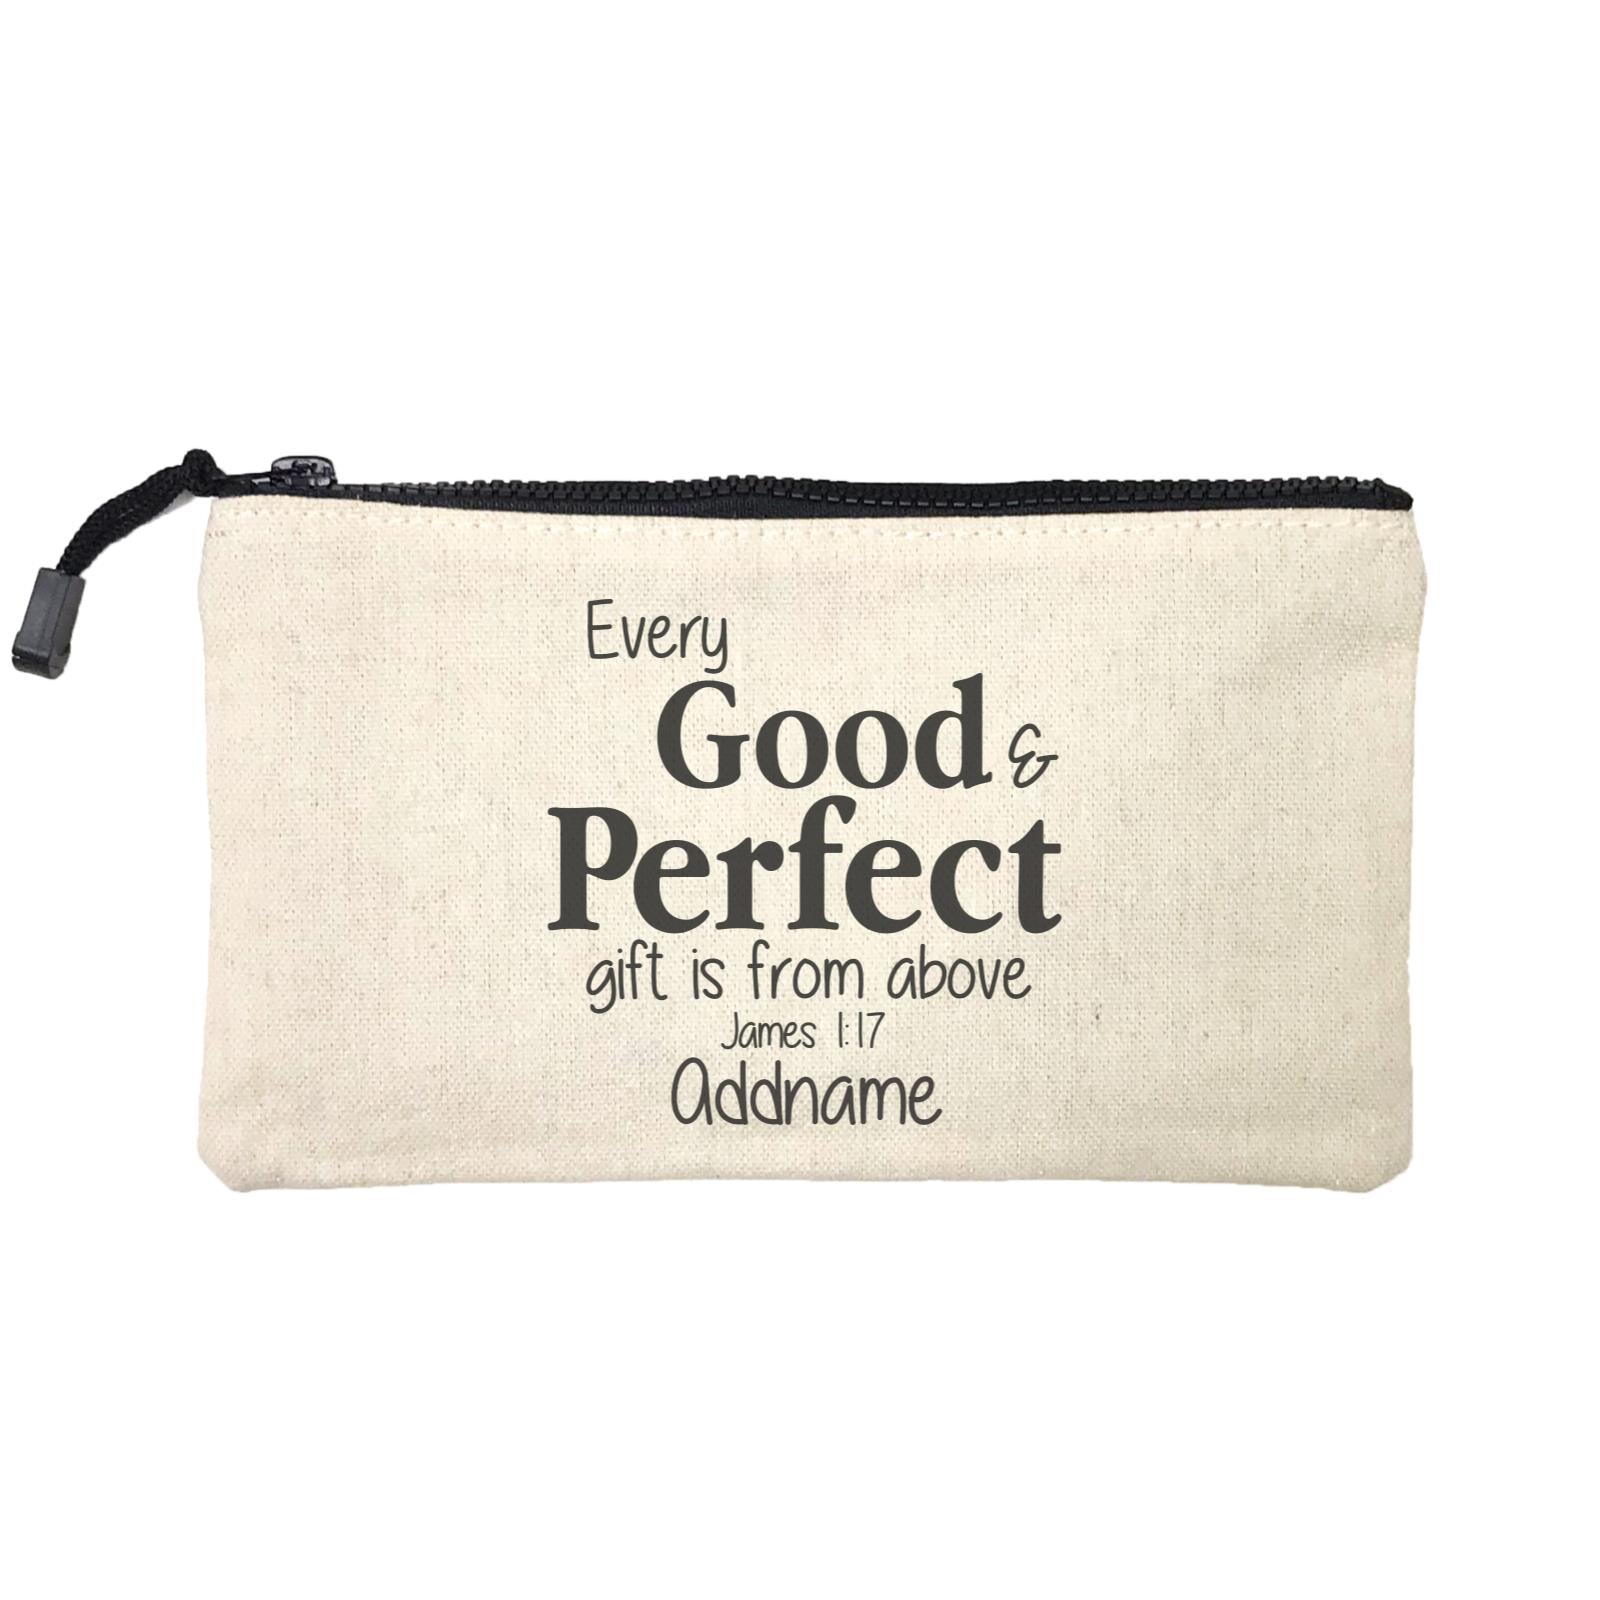 Christ Newborn Every Good and Perfect Gift is from Above James 1.17 Addname Mini Accessories Stationery Pouch